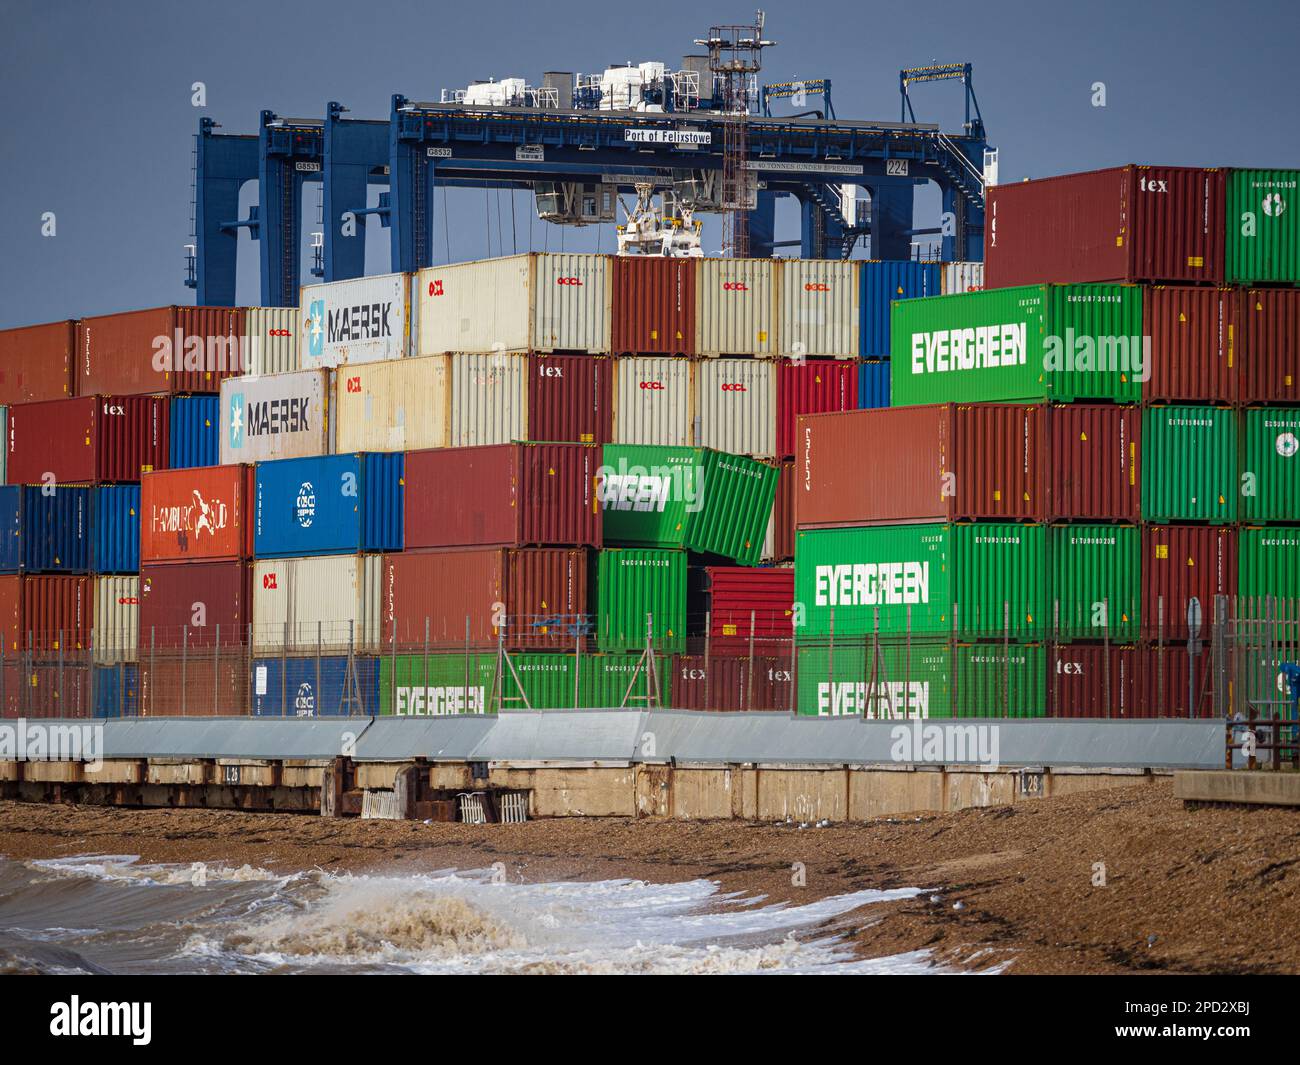 Damaged Shipping Containers. Toppled Shipping Containers at Felixstowe Port. Container Stack Topple. Stock Photo